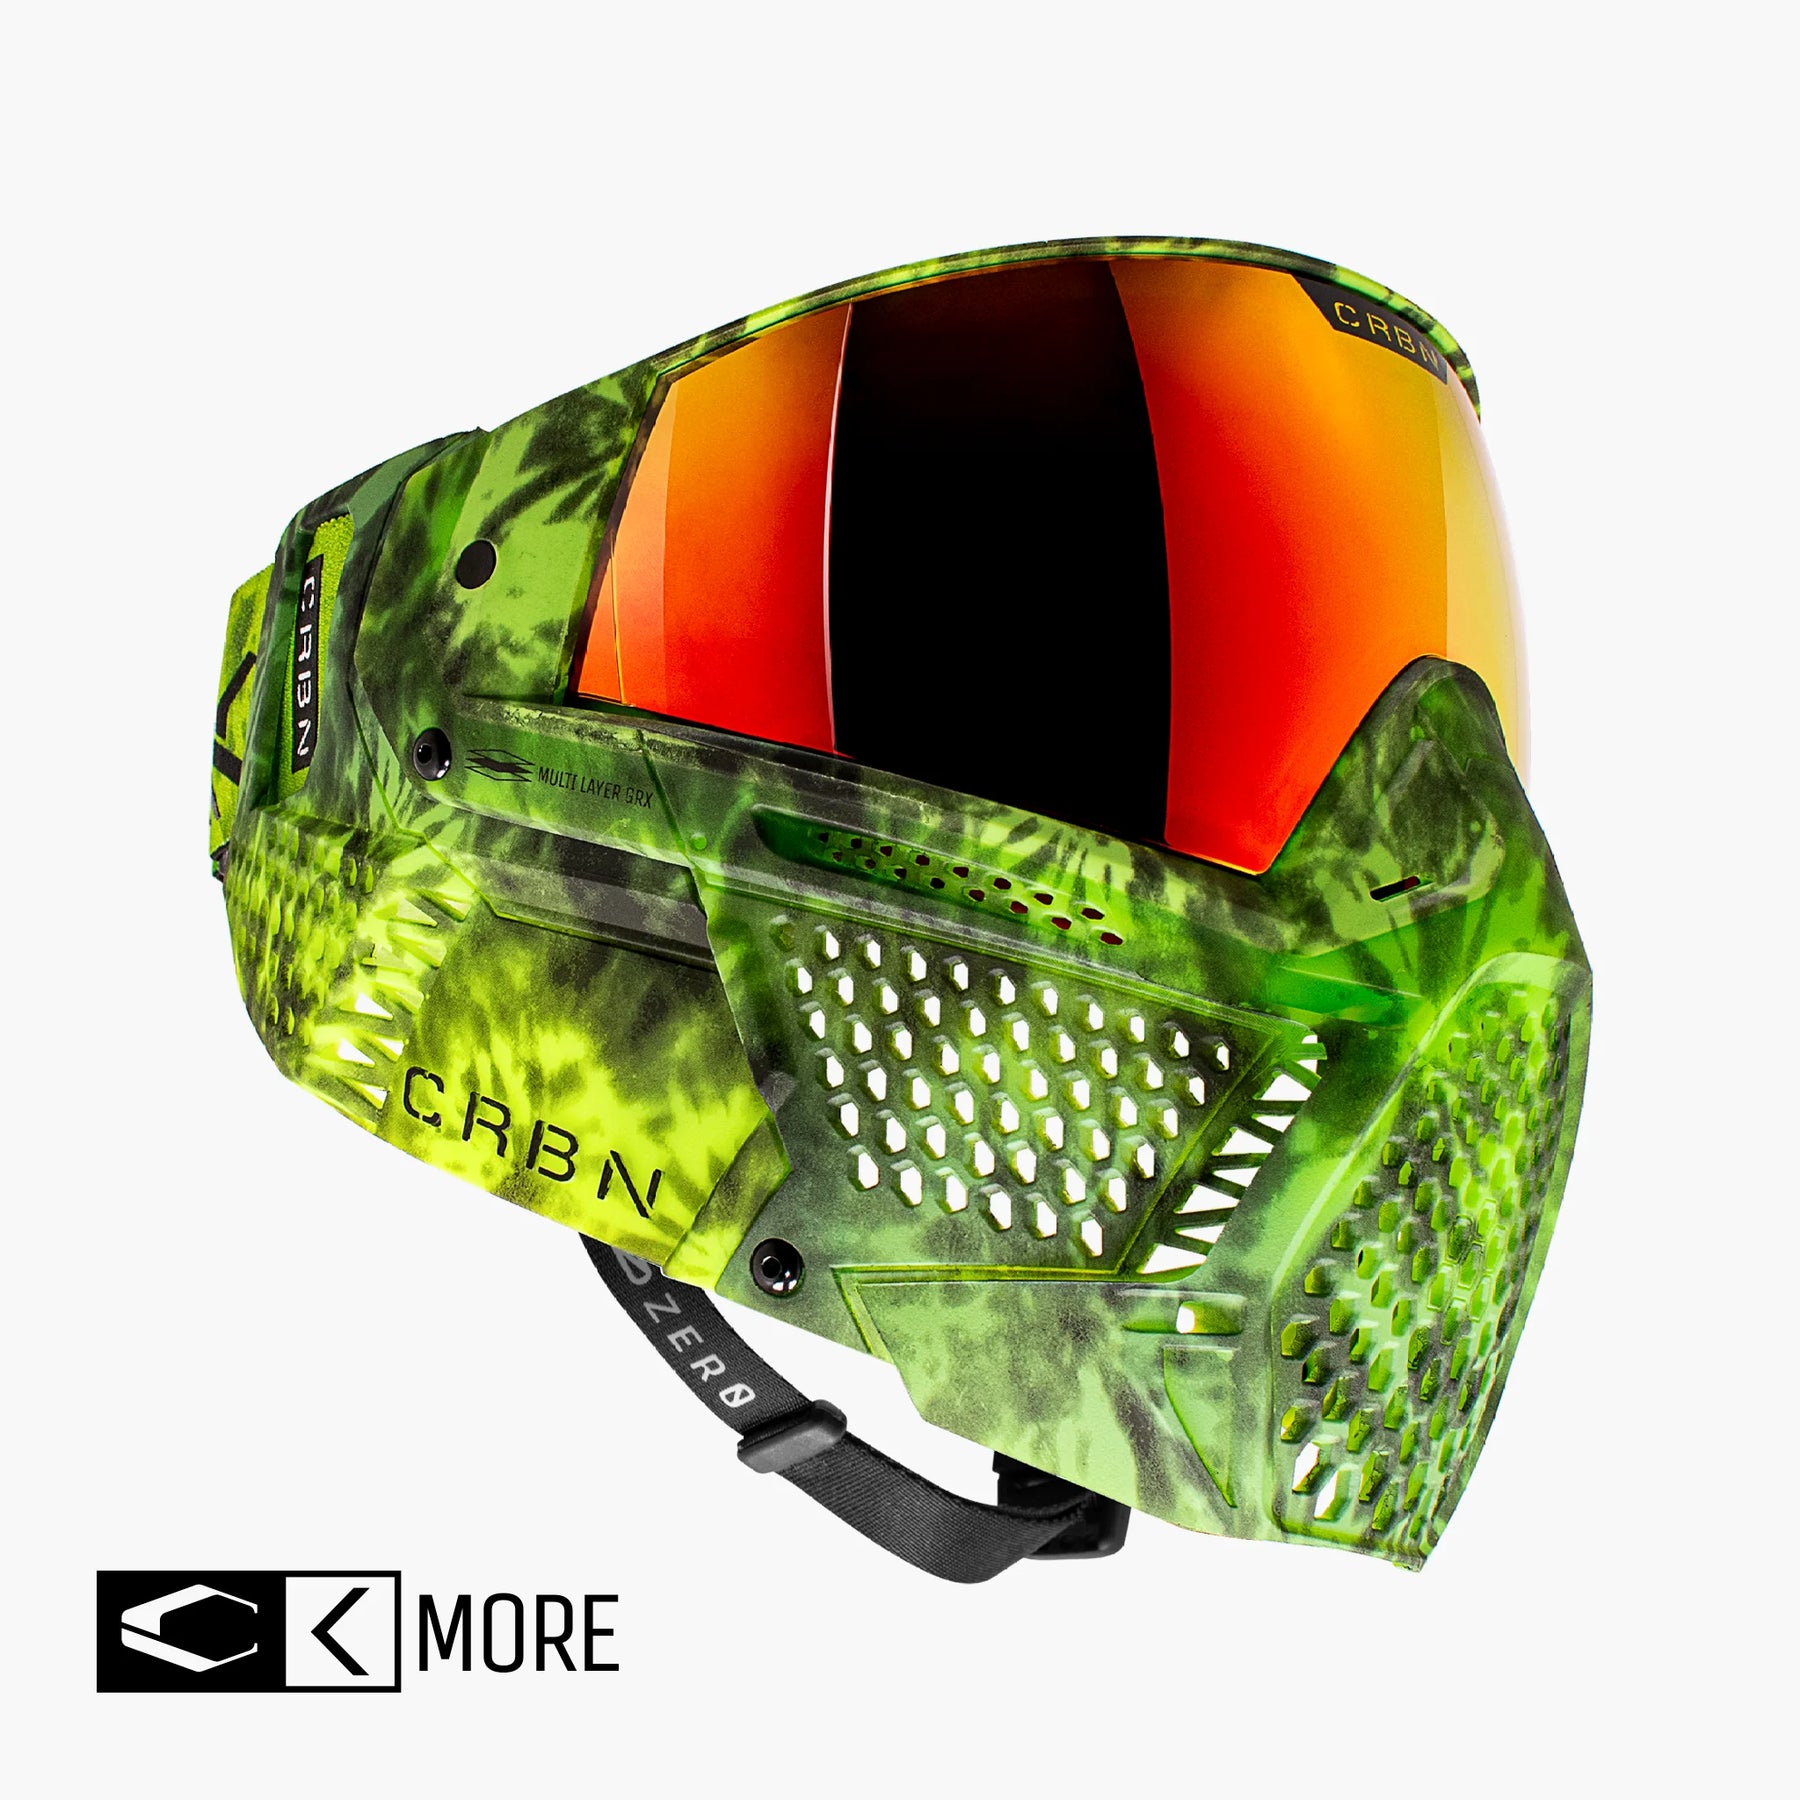 CRBN zero GRX tie dye gecko - Less/More coverage - Paintball Goggles